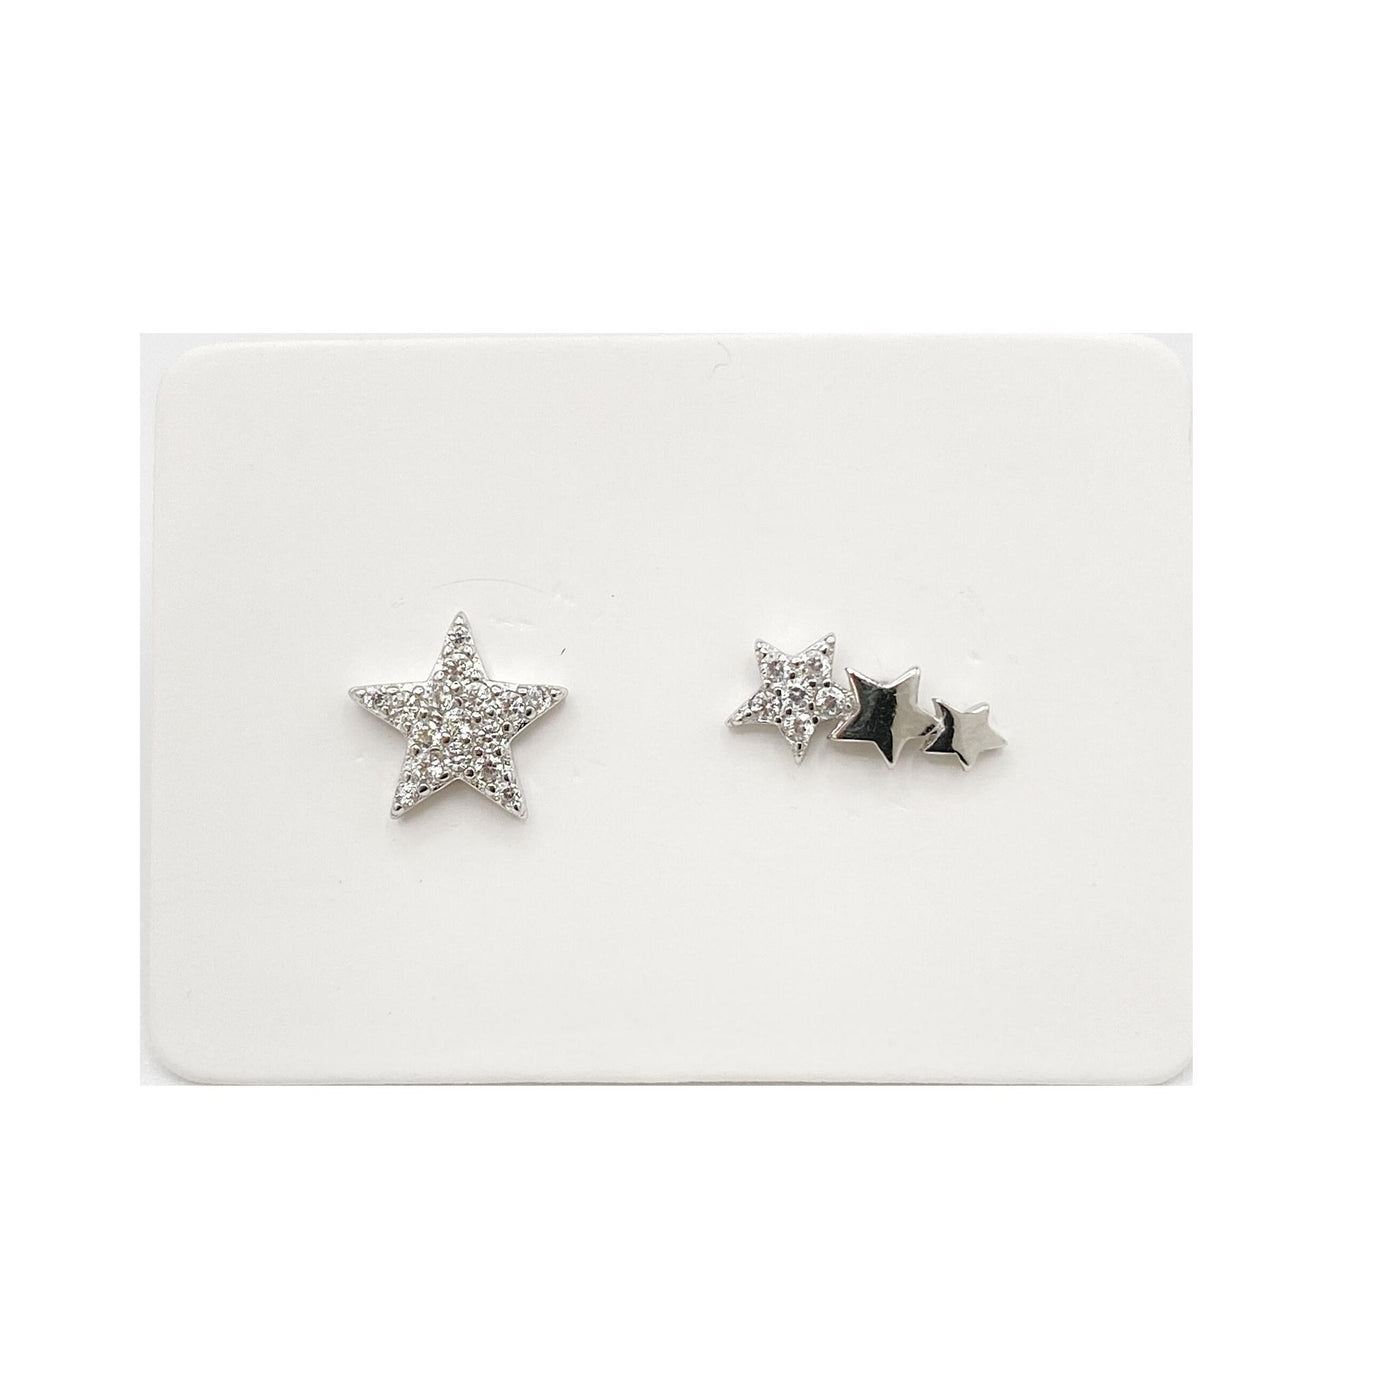 Pack of 5 stud earrings with stars